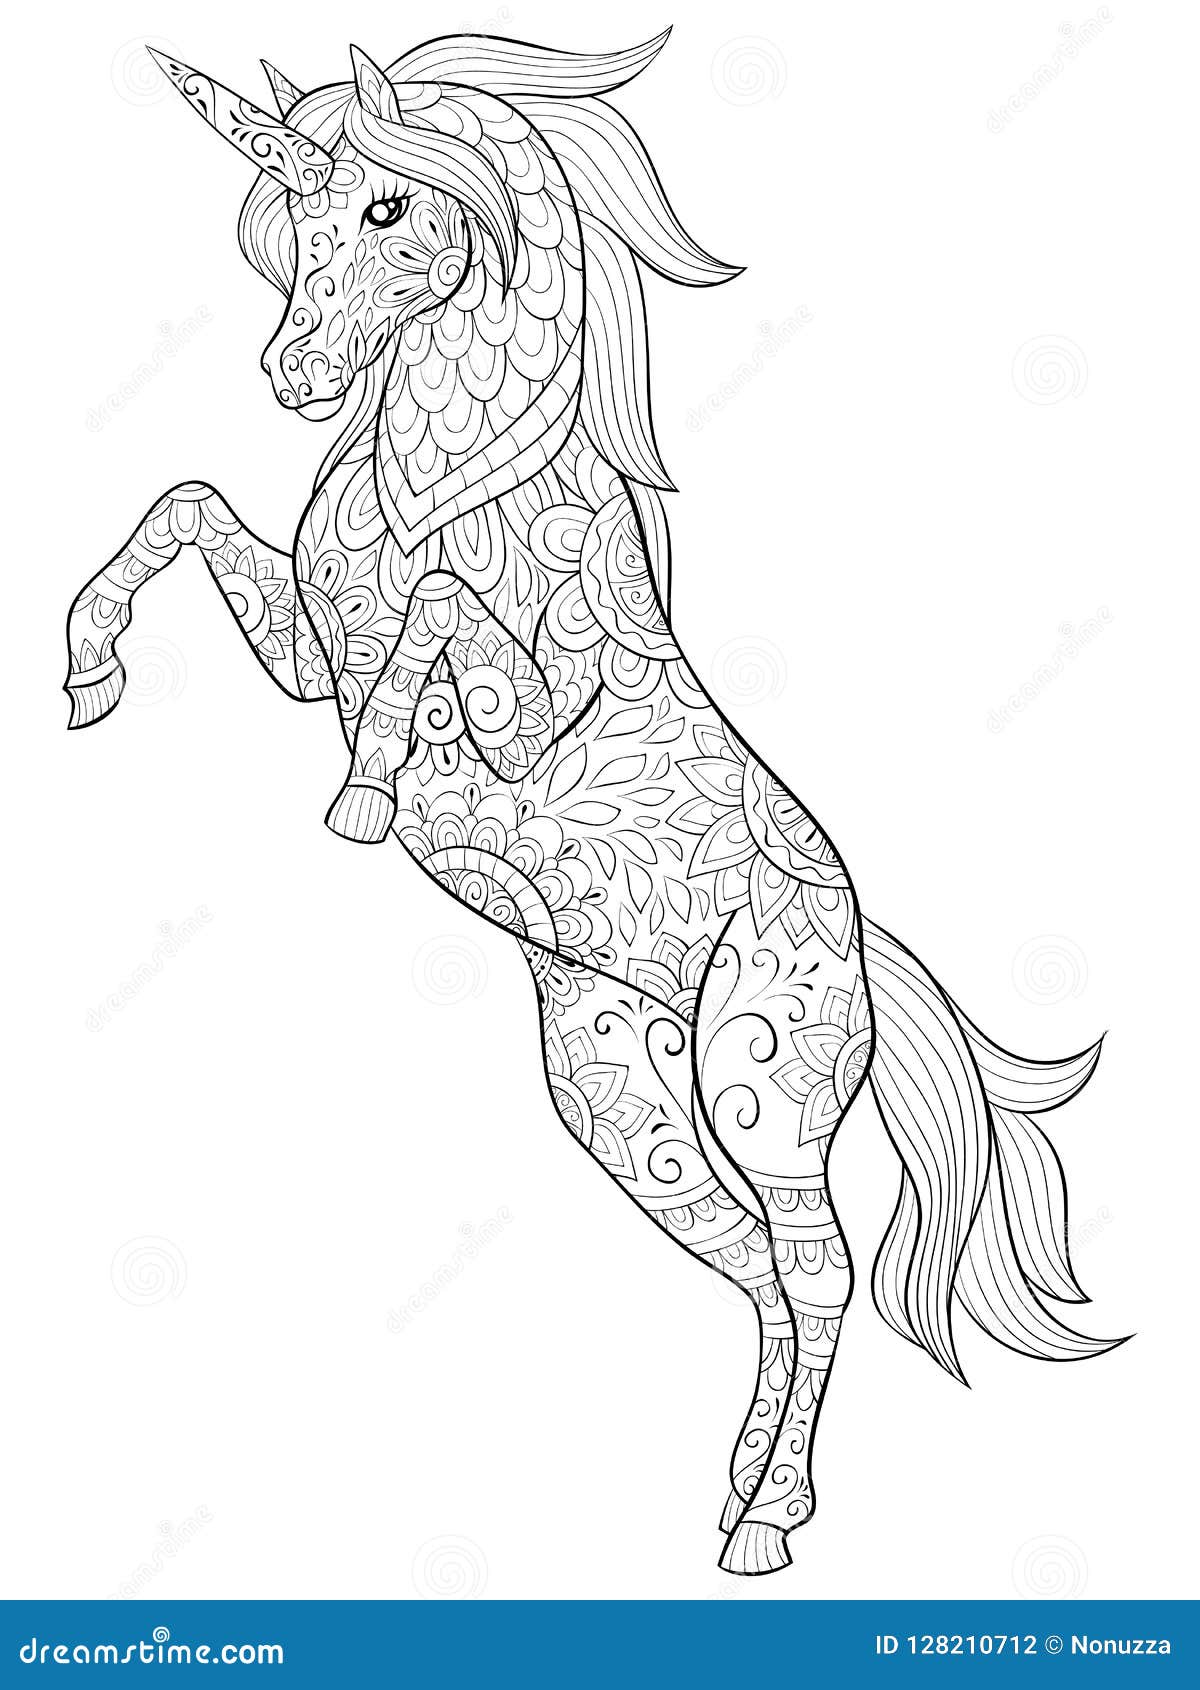 Adult Coloring Book,page a Cute Horse,unicorn Image for Relaxing. Stock